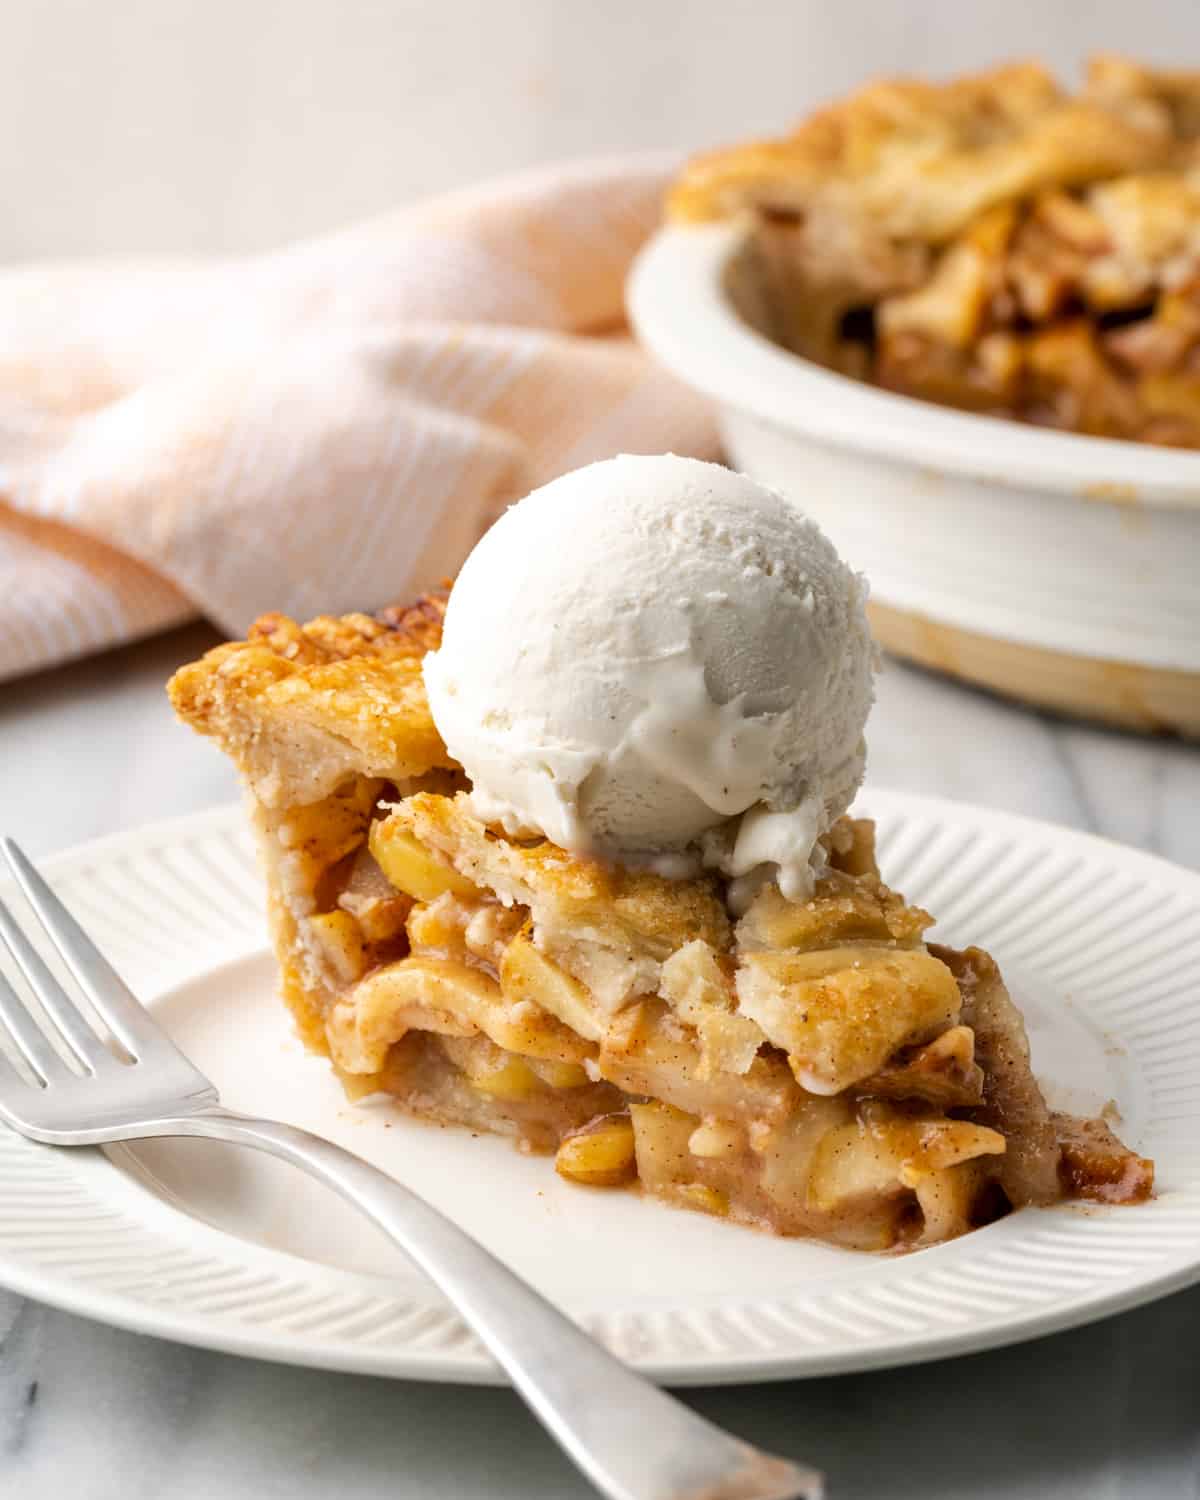 A slice of apple pear pie topped with a scoop of vanilla ice cream.